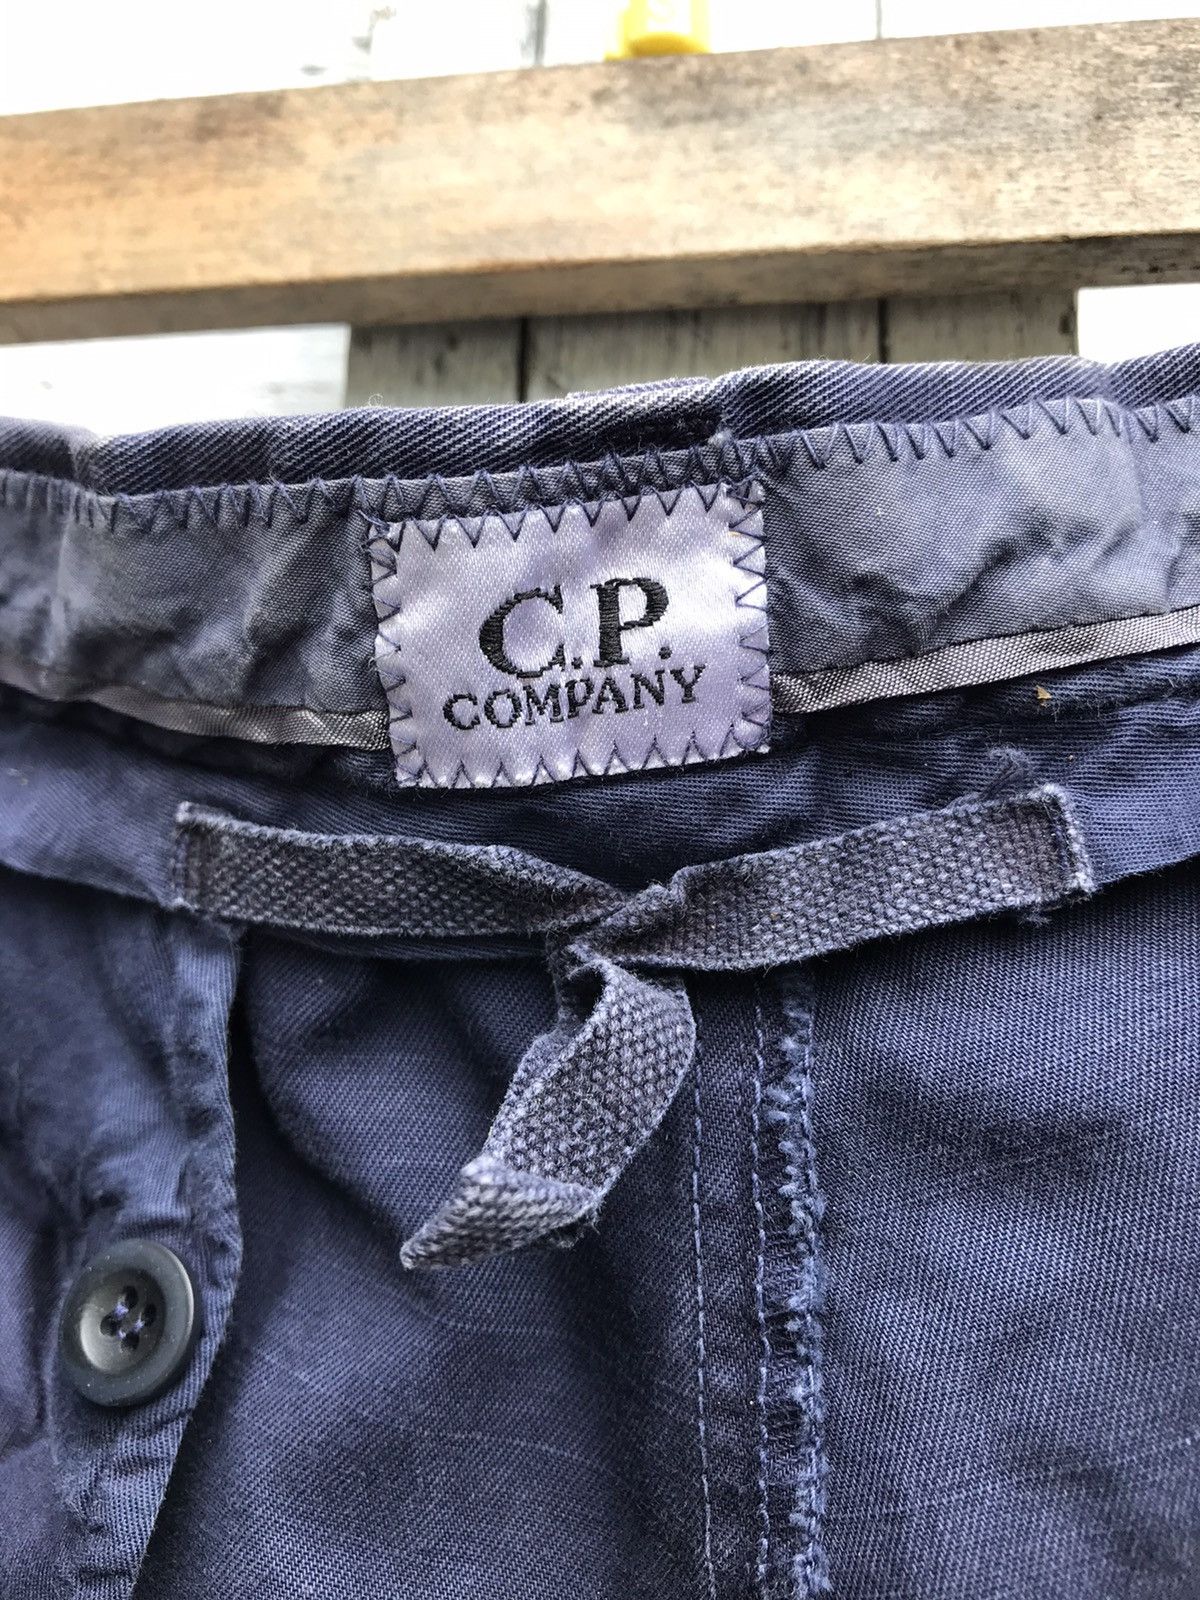 Cp Company Casual Pant/Trouser - 6